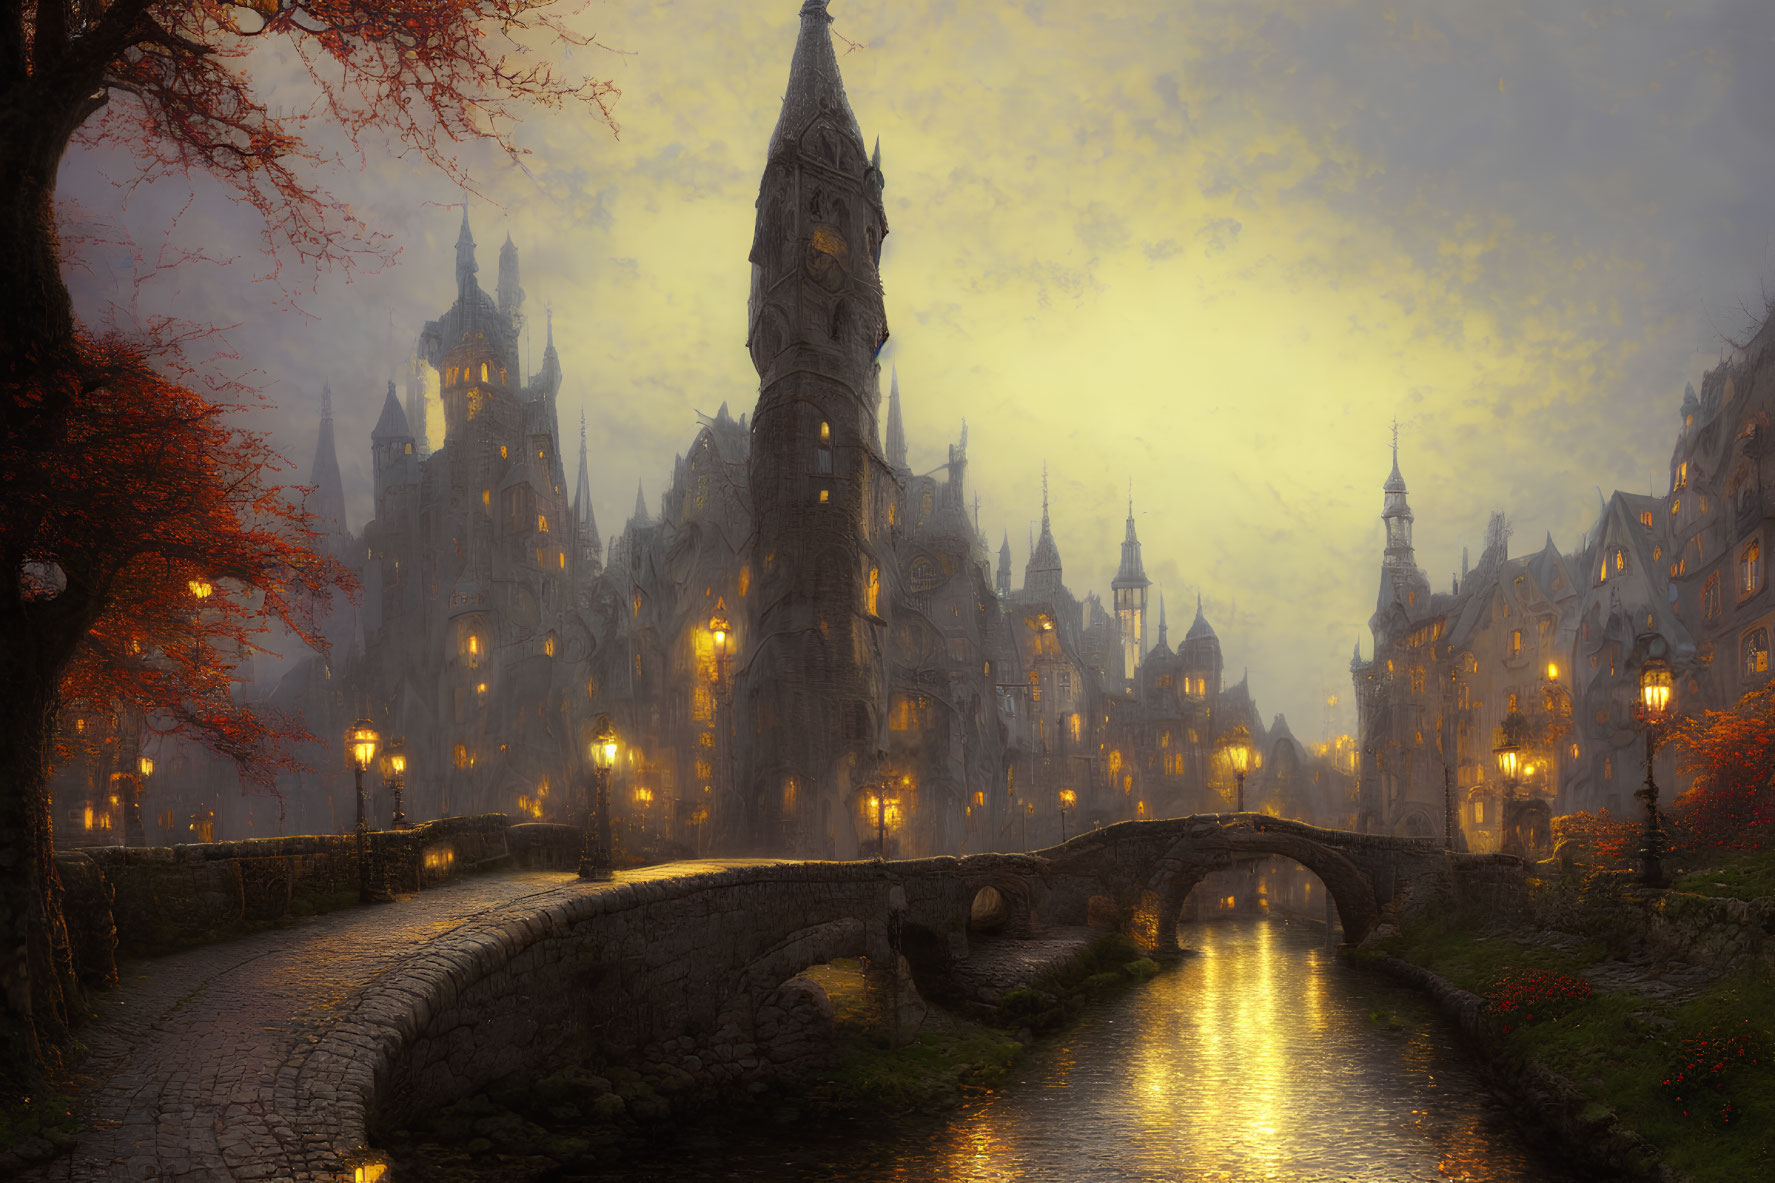 Medieval fantasy cityscape at twilight with stone buildings, spire, bridge, and autumn foliage